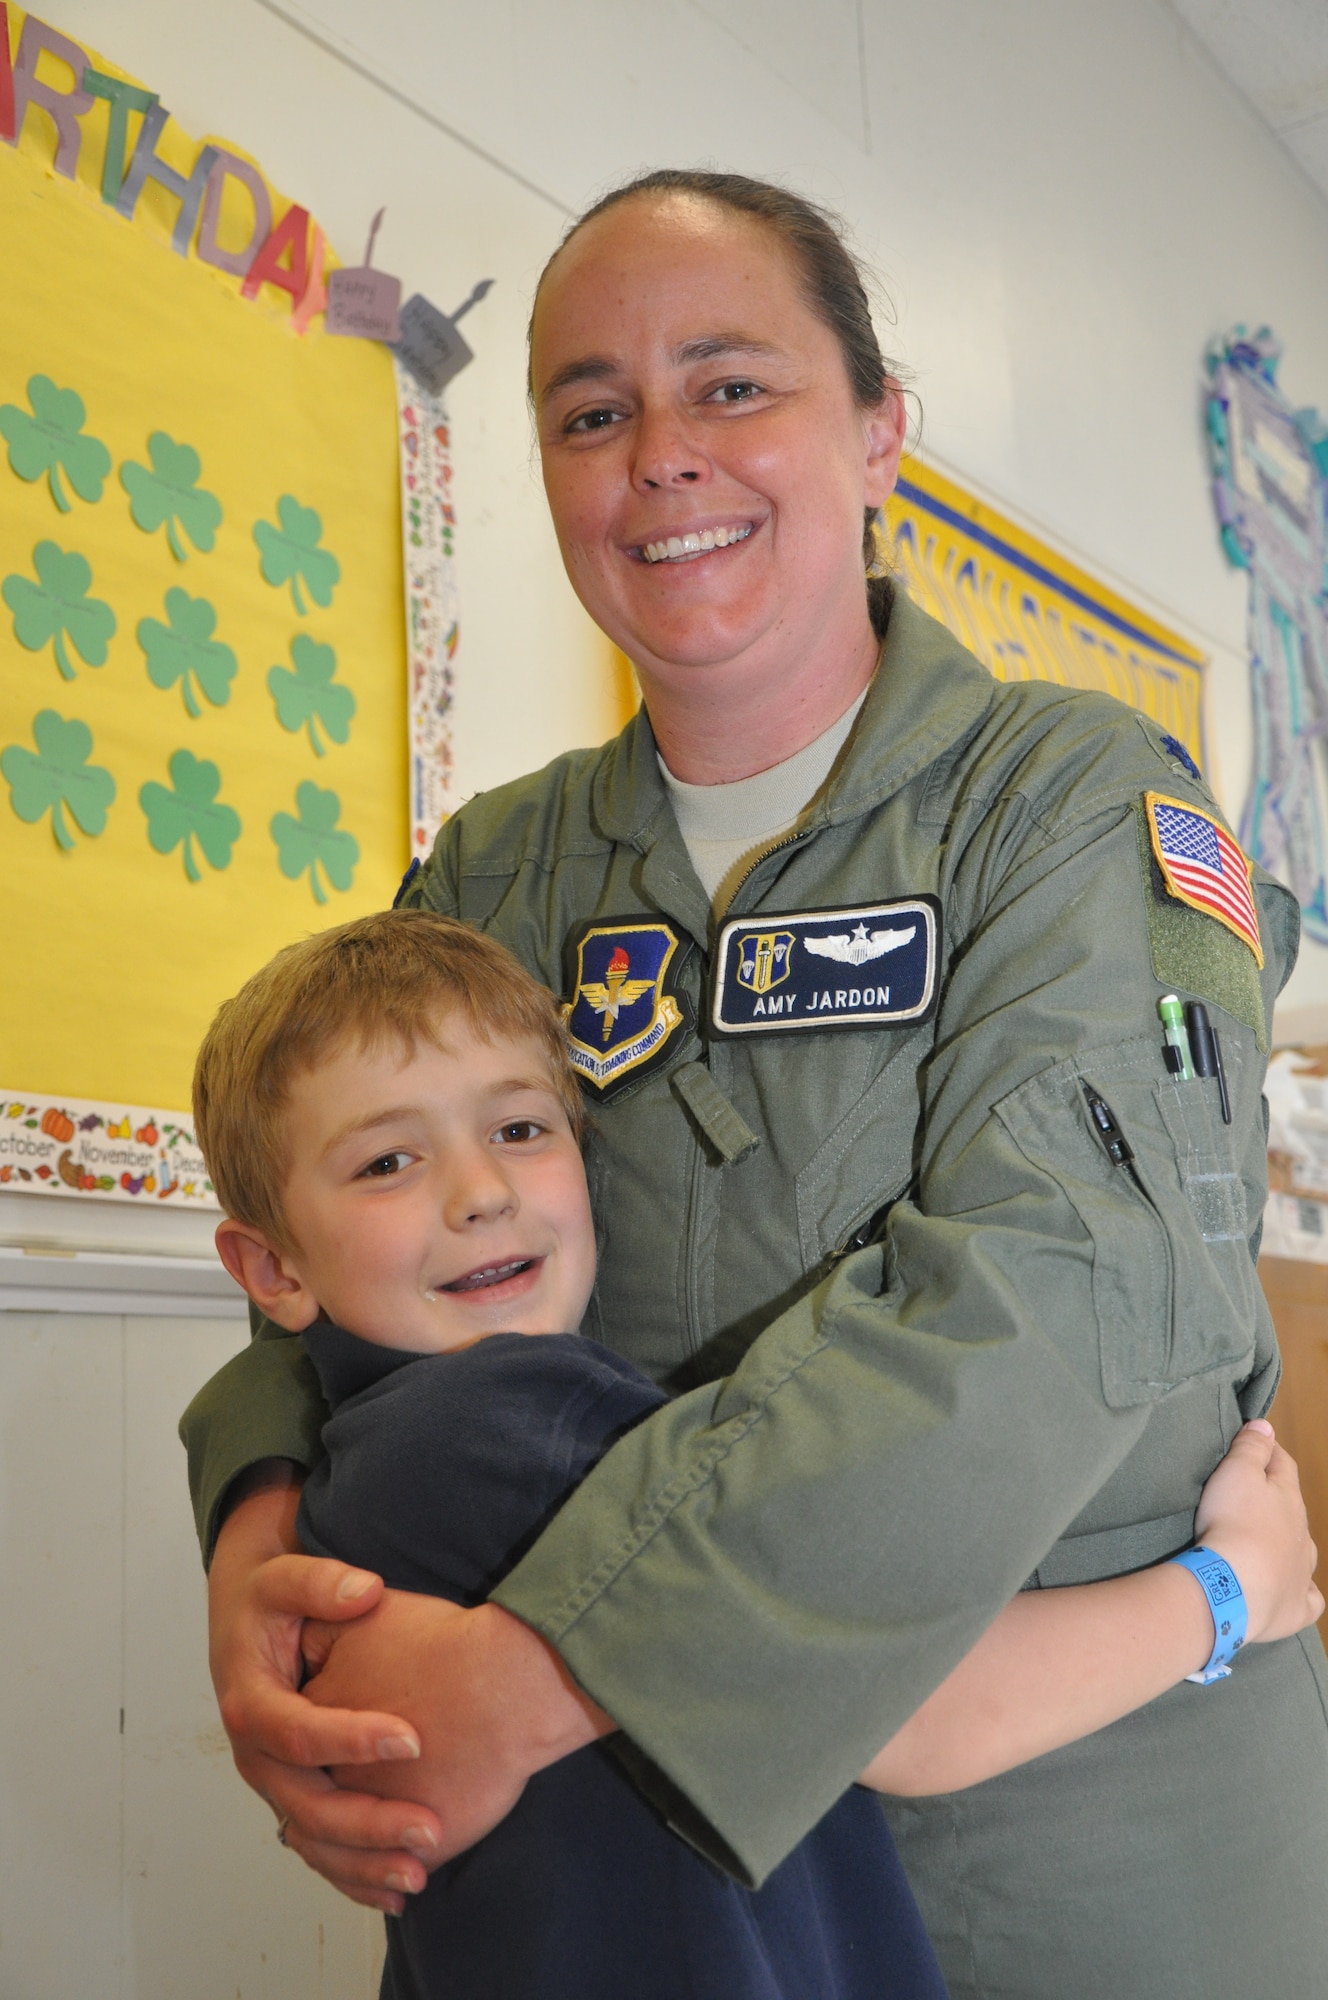 Lt. Col. Amy Jardon, 314th Airlift Wing chief of safety, embraces her first-grade son, William Mainstone, while visiting him for lunch at Arnold Drive Elementary School, April 17, 2012, at Little Rock Air Force Base, Ark. Mainstone said he wants to be just like his mom when he grows up. (U.S. Air Force photo by Airman 1st Class Regina Agoha)